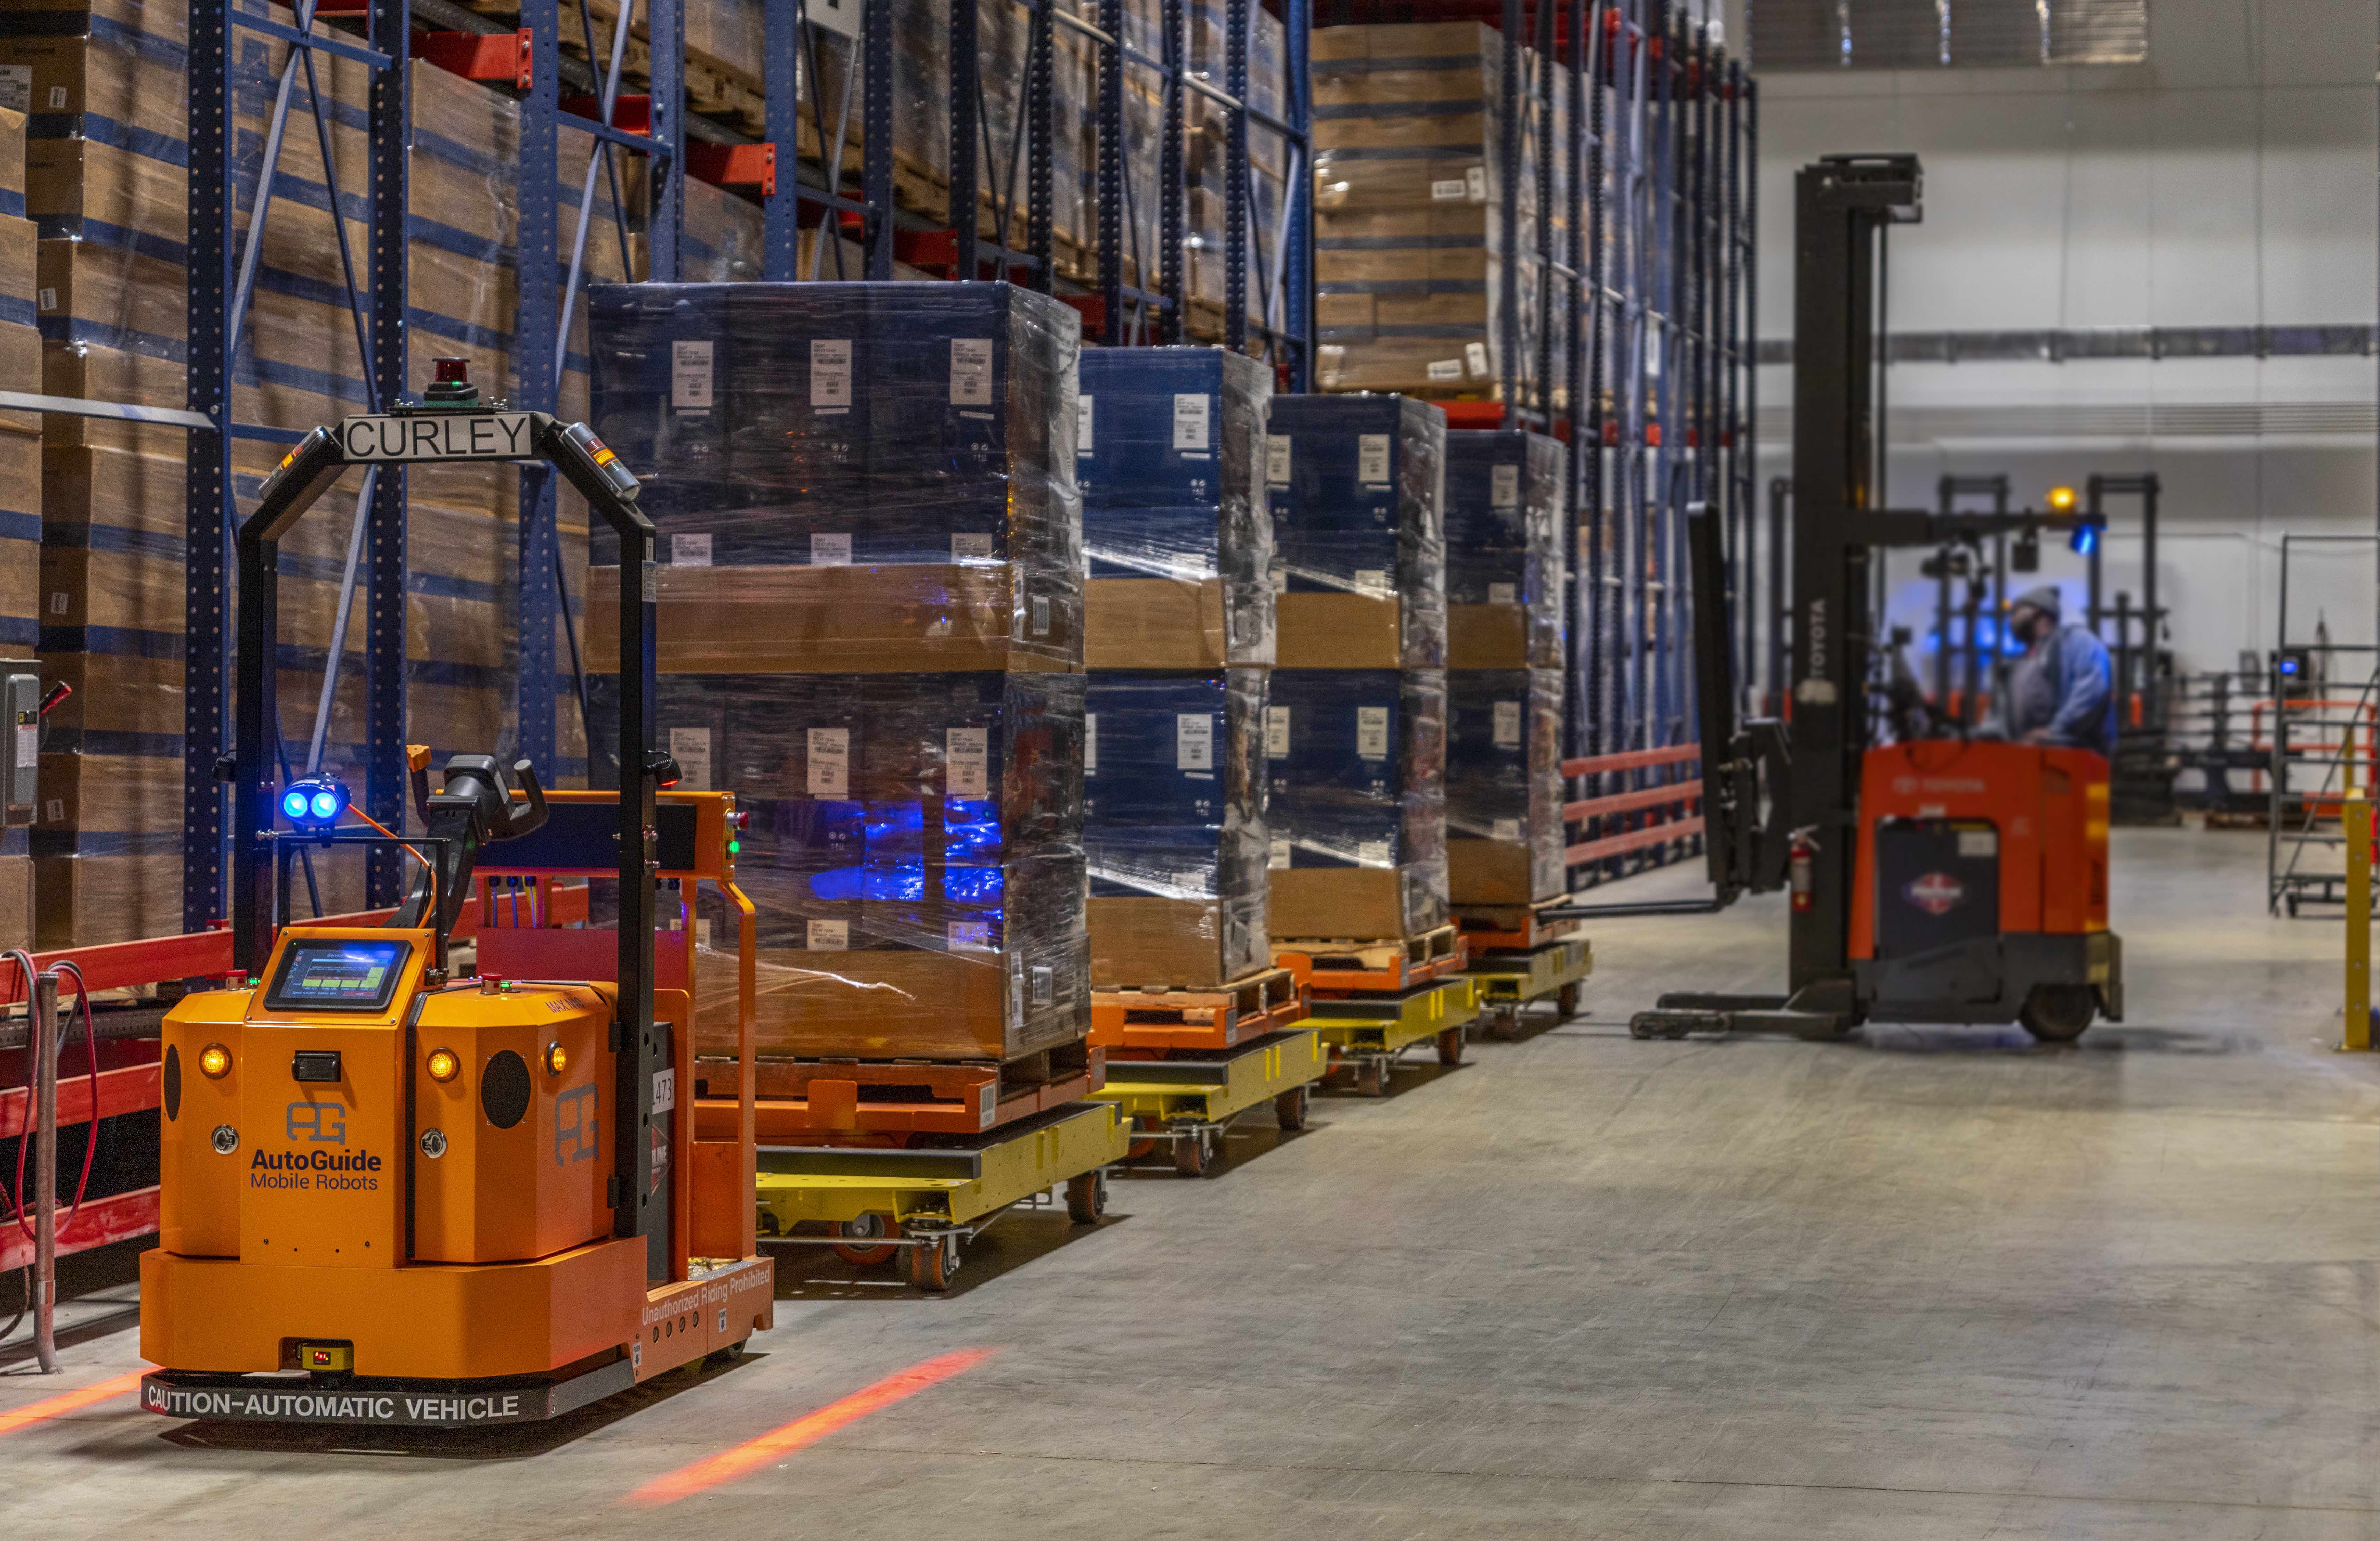 High-capacity autonomous mobile robots can now automate a variety of manufacturing and logistics tasks.